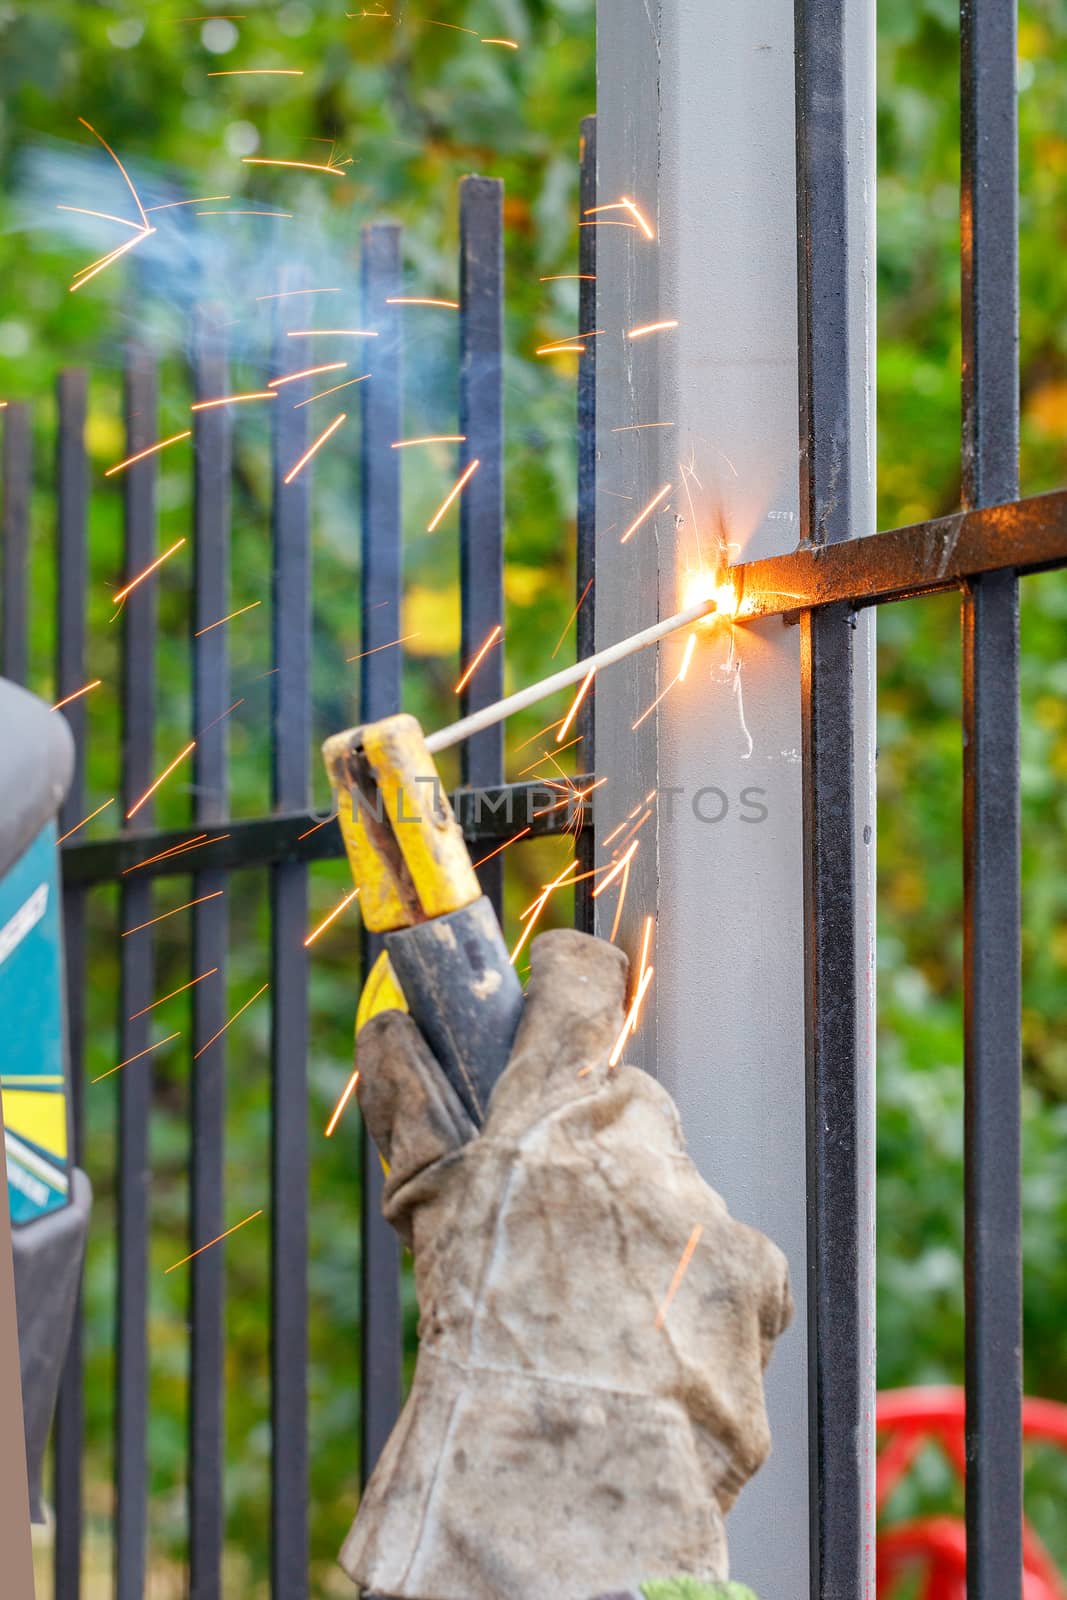 A welder works with metal, welds a metal fence in a park area. by Sergii